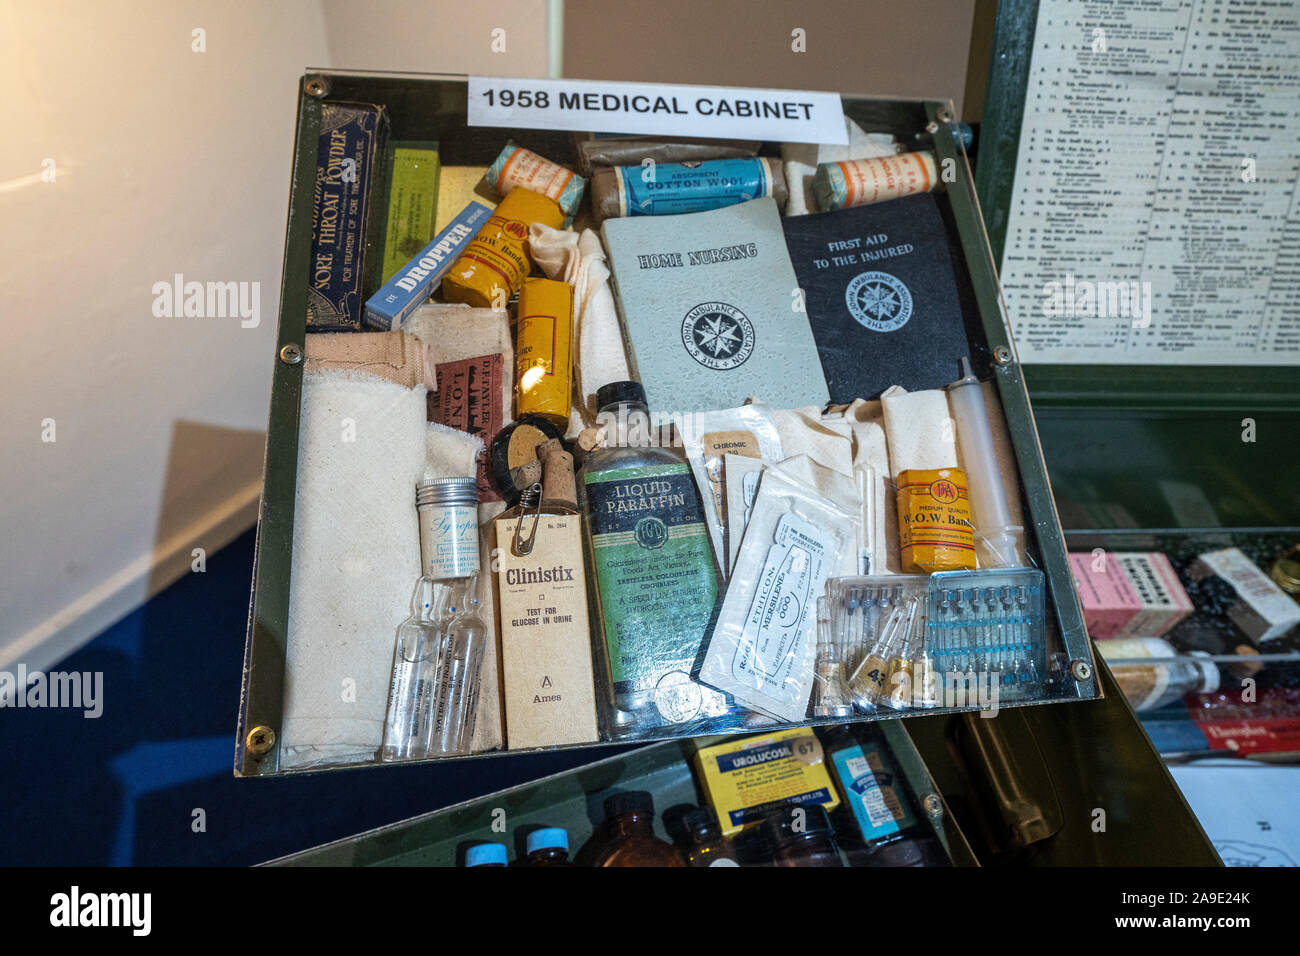 A Royal Flying Doctor Service medical chest from 1958 which was used by remote communities in outback Australia. Alice Springs, Northern Territory. Stock Photo